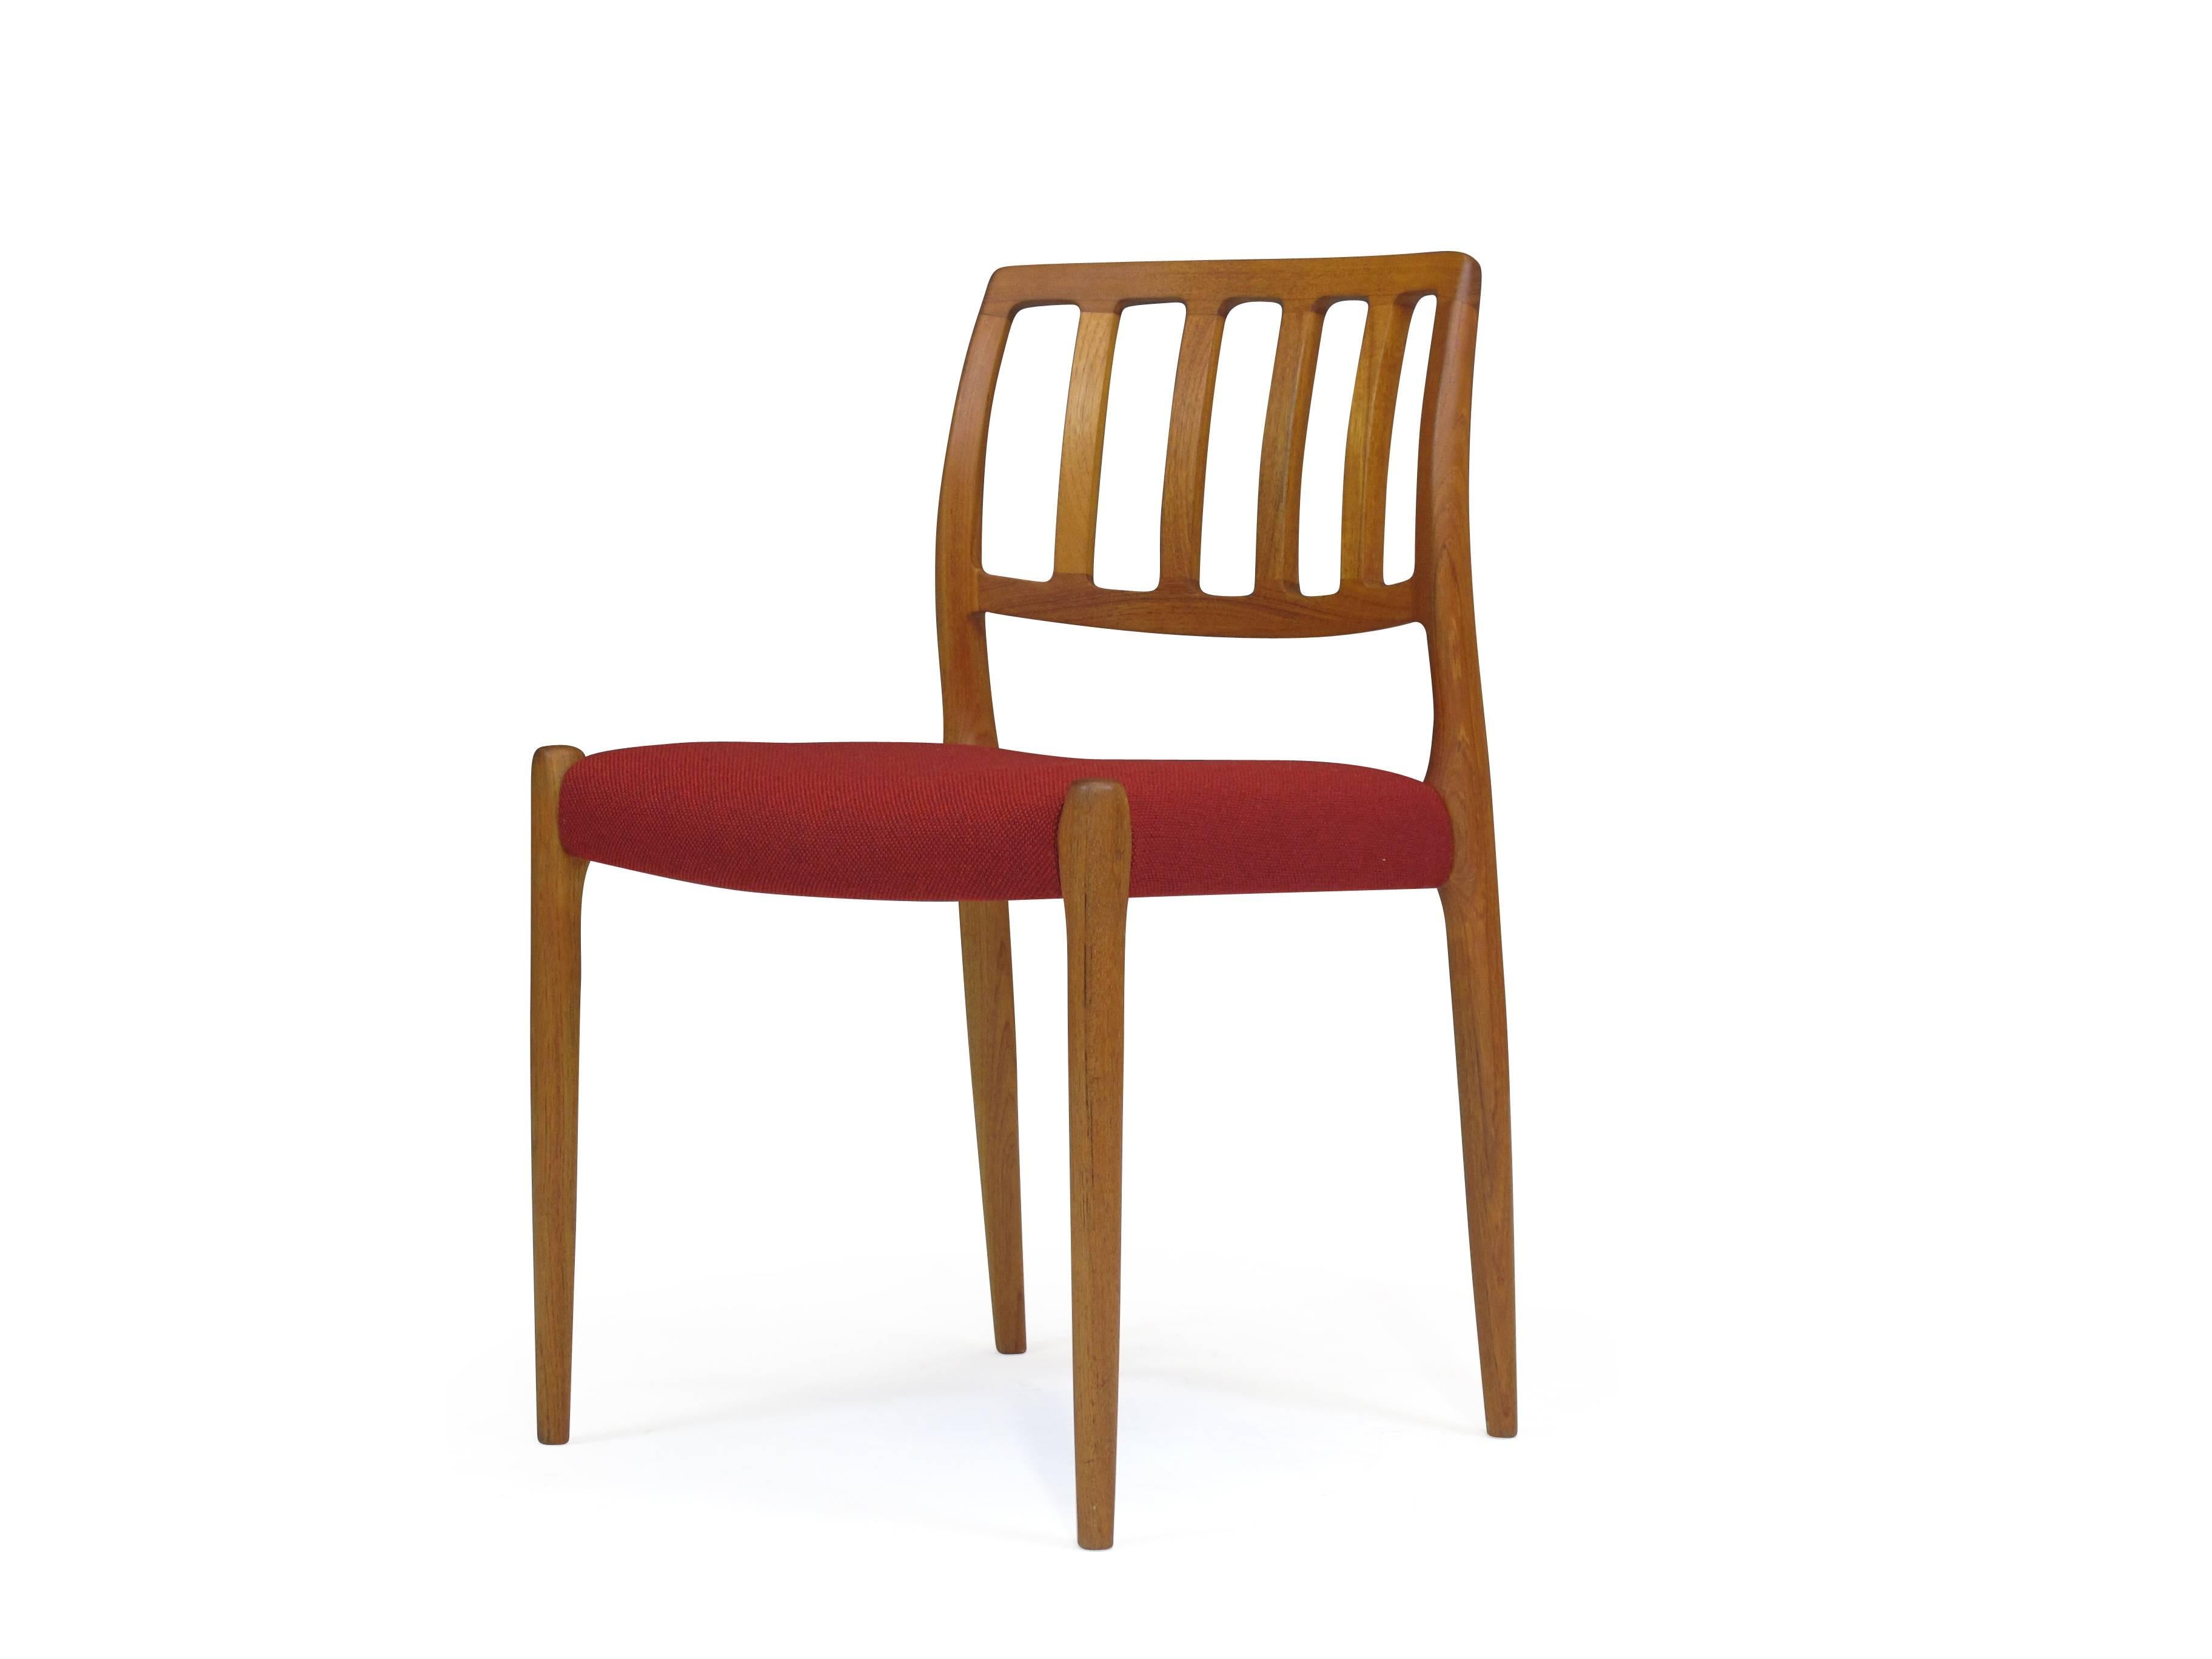 Mid-Century teak dining chairs designed by Niels Otto Møller for J. L. Møller. Model 83. Newly upholstered seats in a traditional red wool textile. The chairs have been professionally restored and in excellent condition.